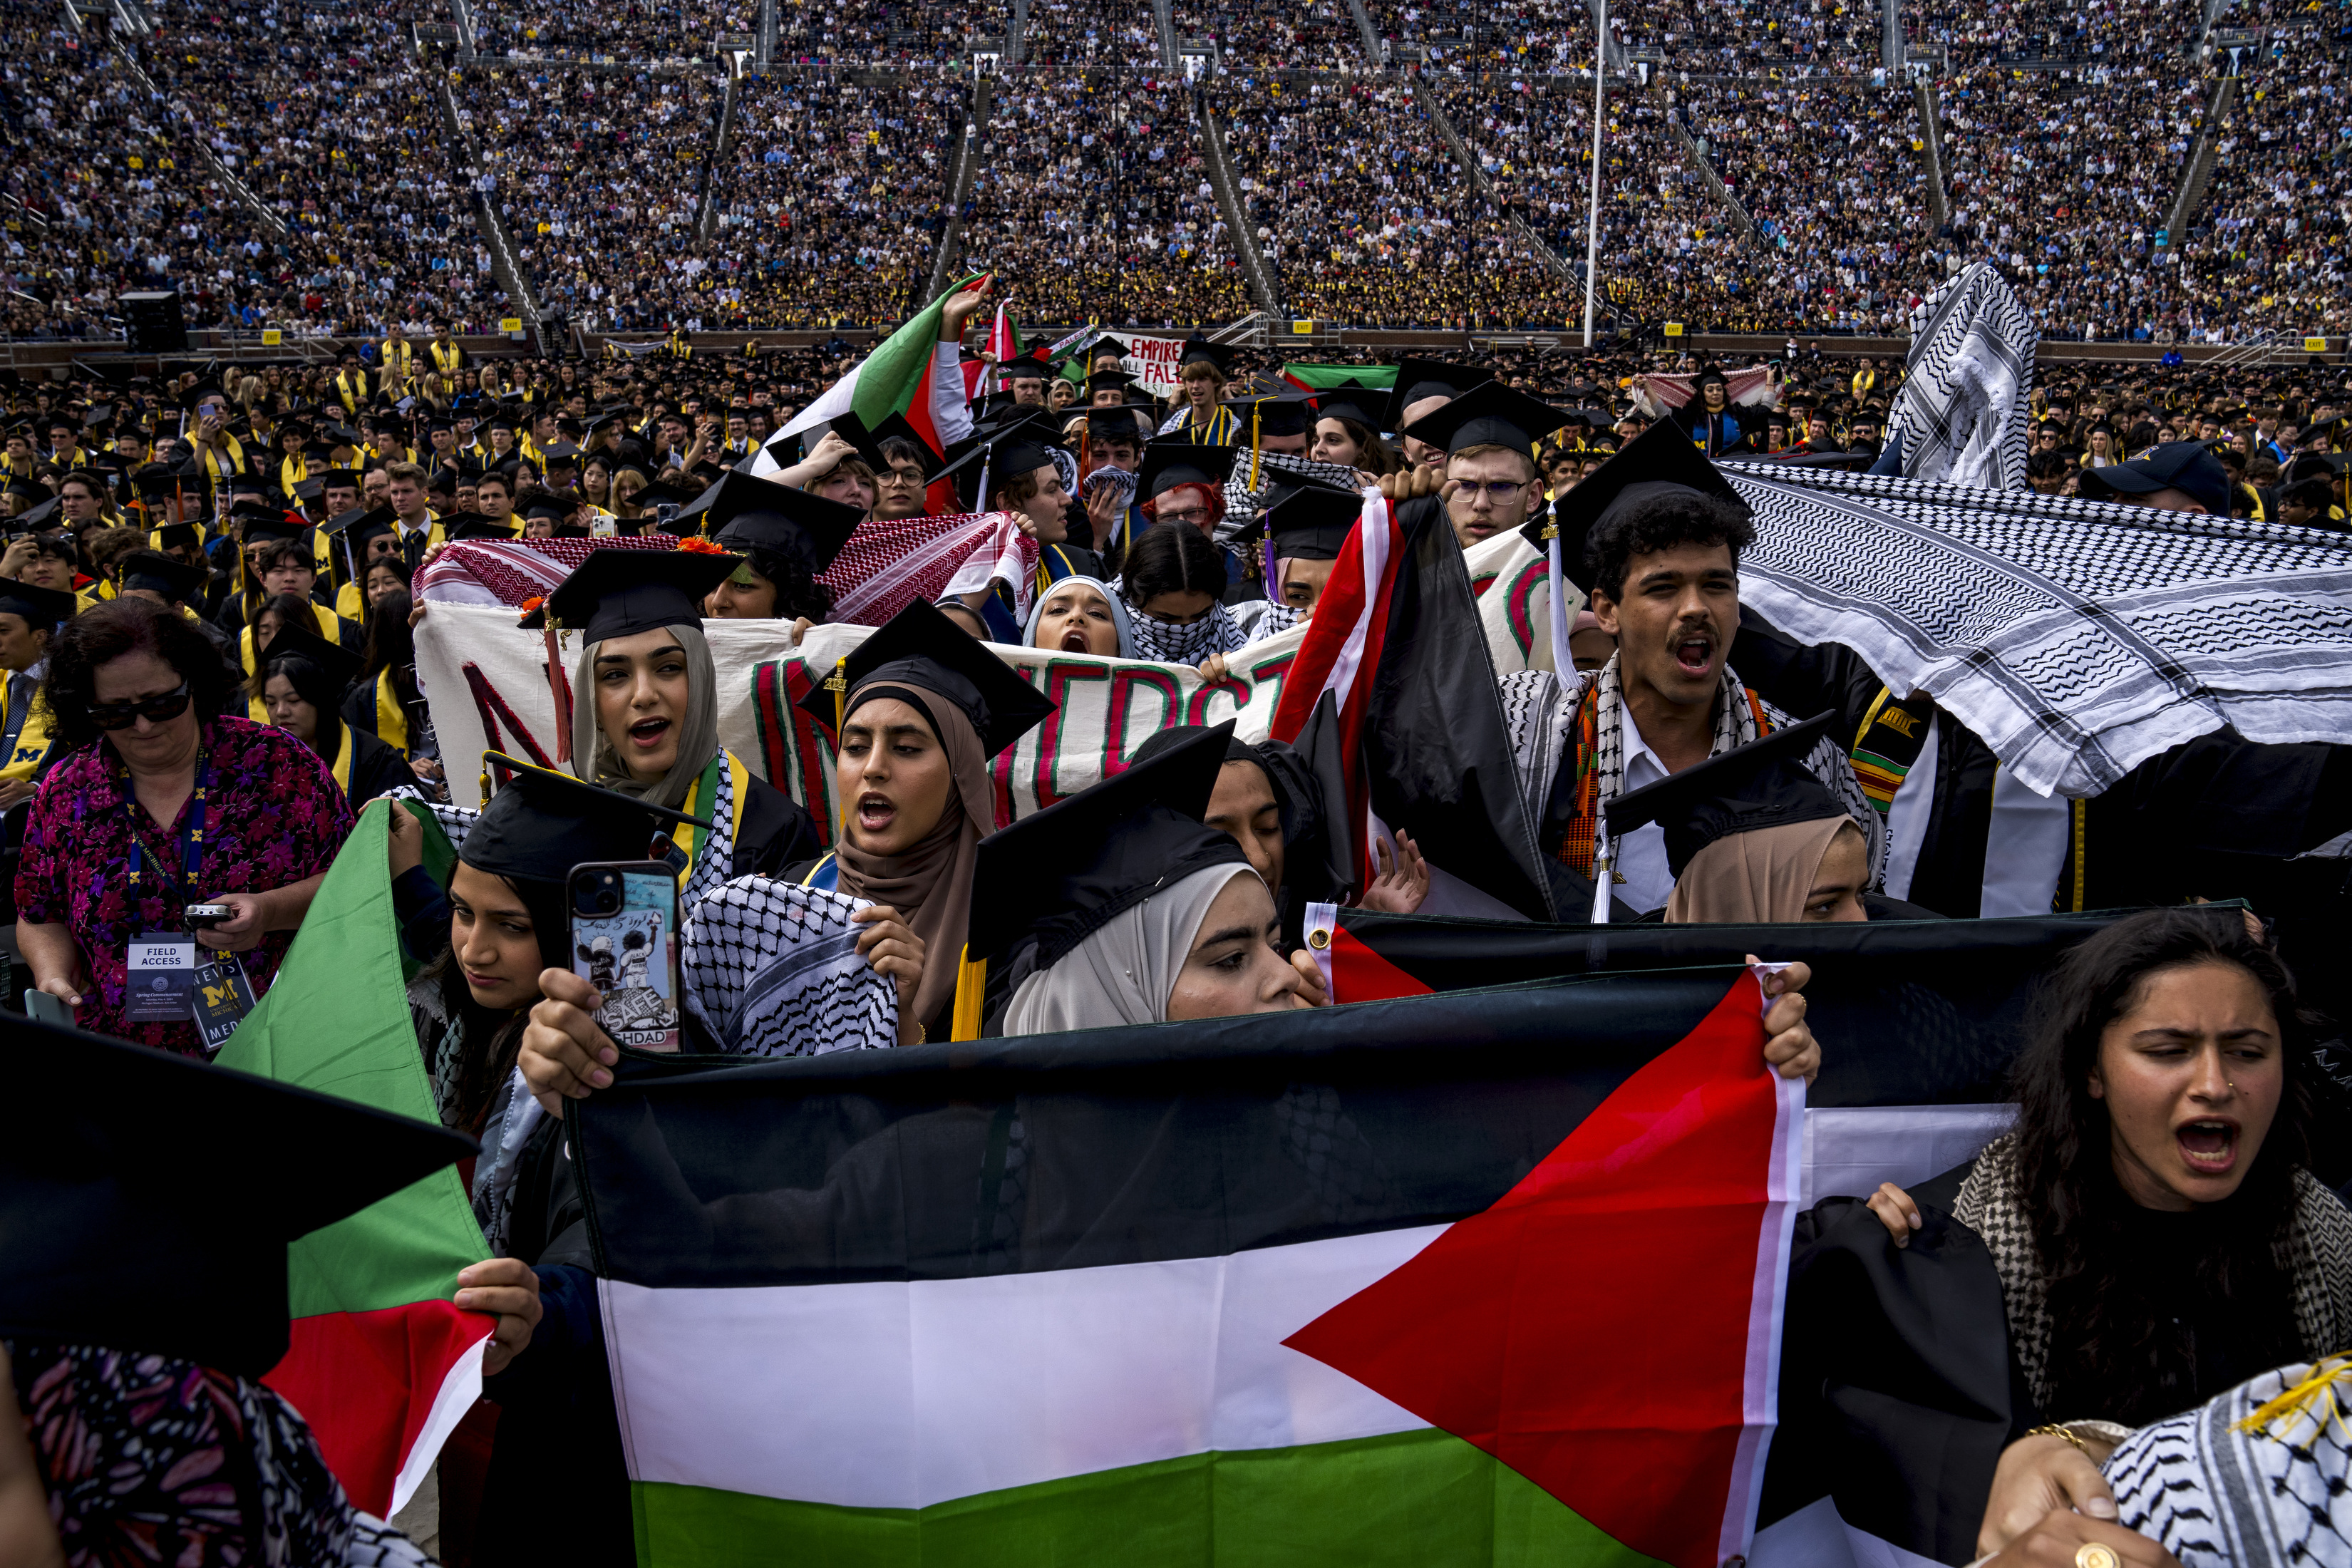 Cheers erupt as pro-Palestinian protesters removed from Michigan graduation